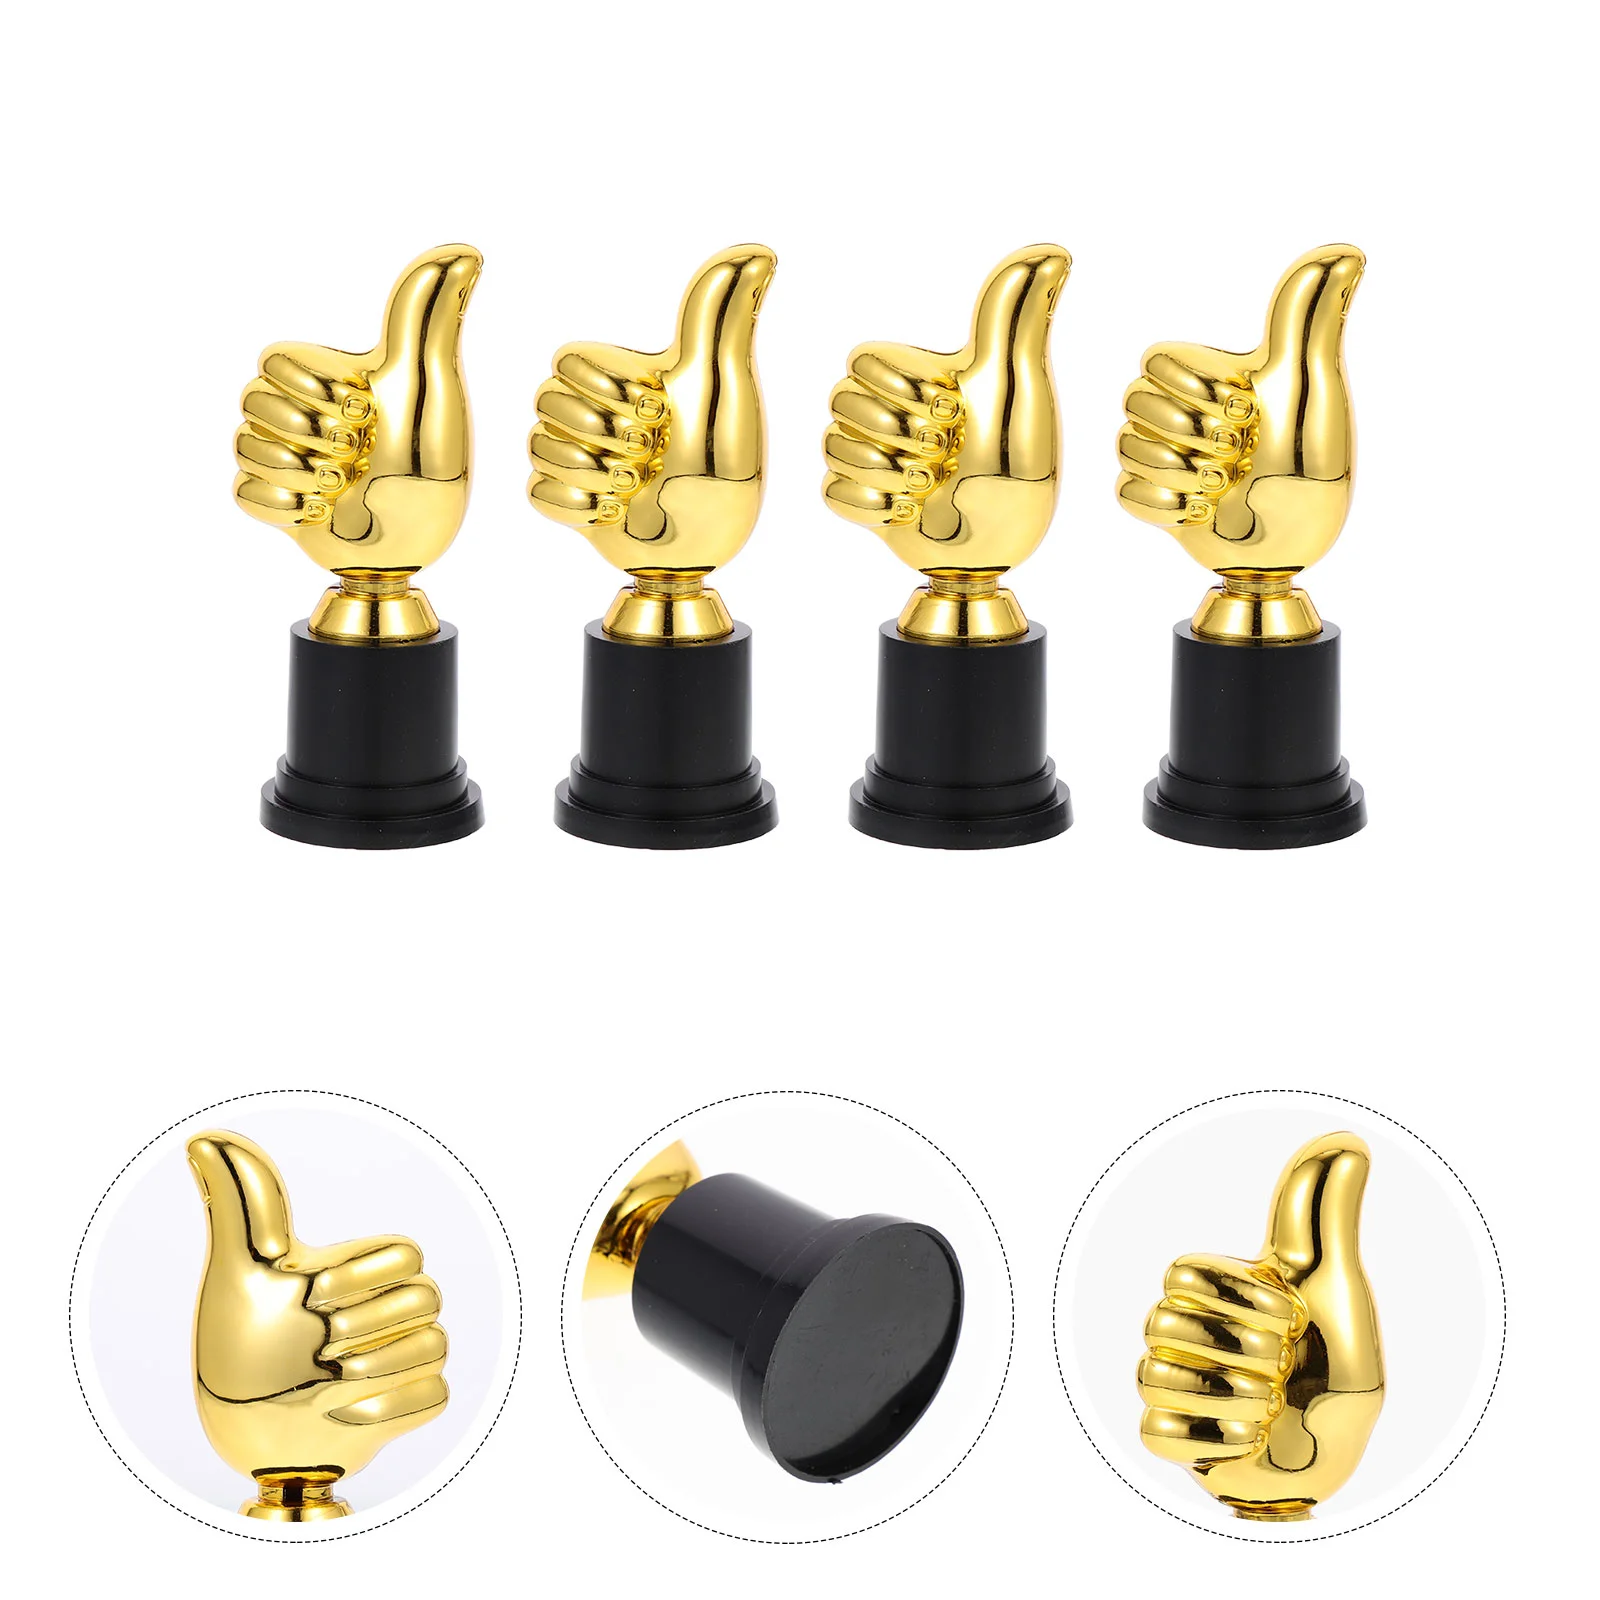 

4 Pcs Basketball Trophy Awards Home Décor Thumb Award Trophy Soccer Kids Gifts Small Trophies Encourage Kids Awesome Trophy